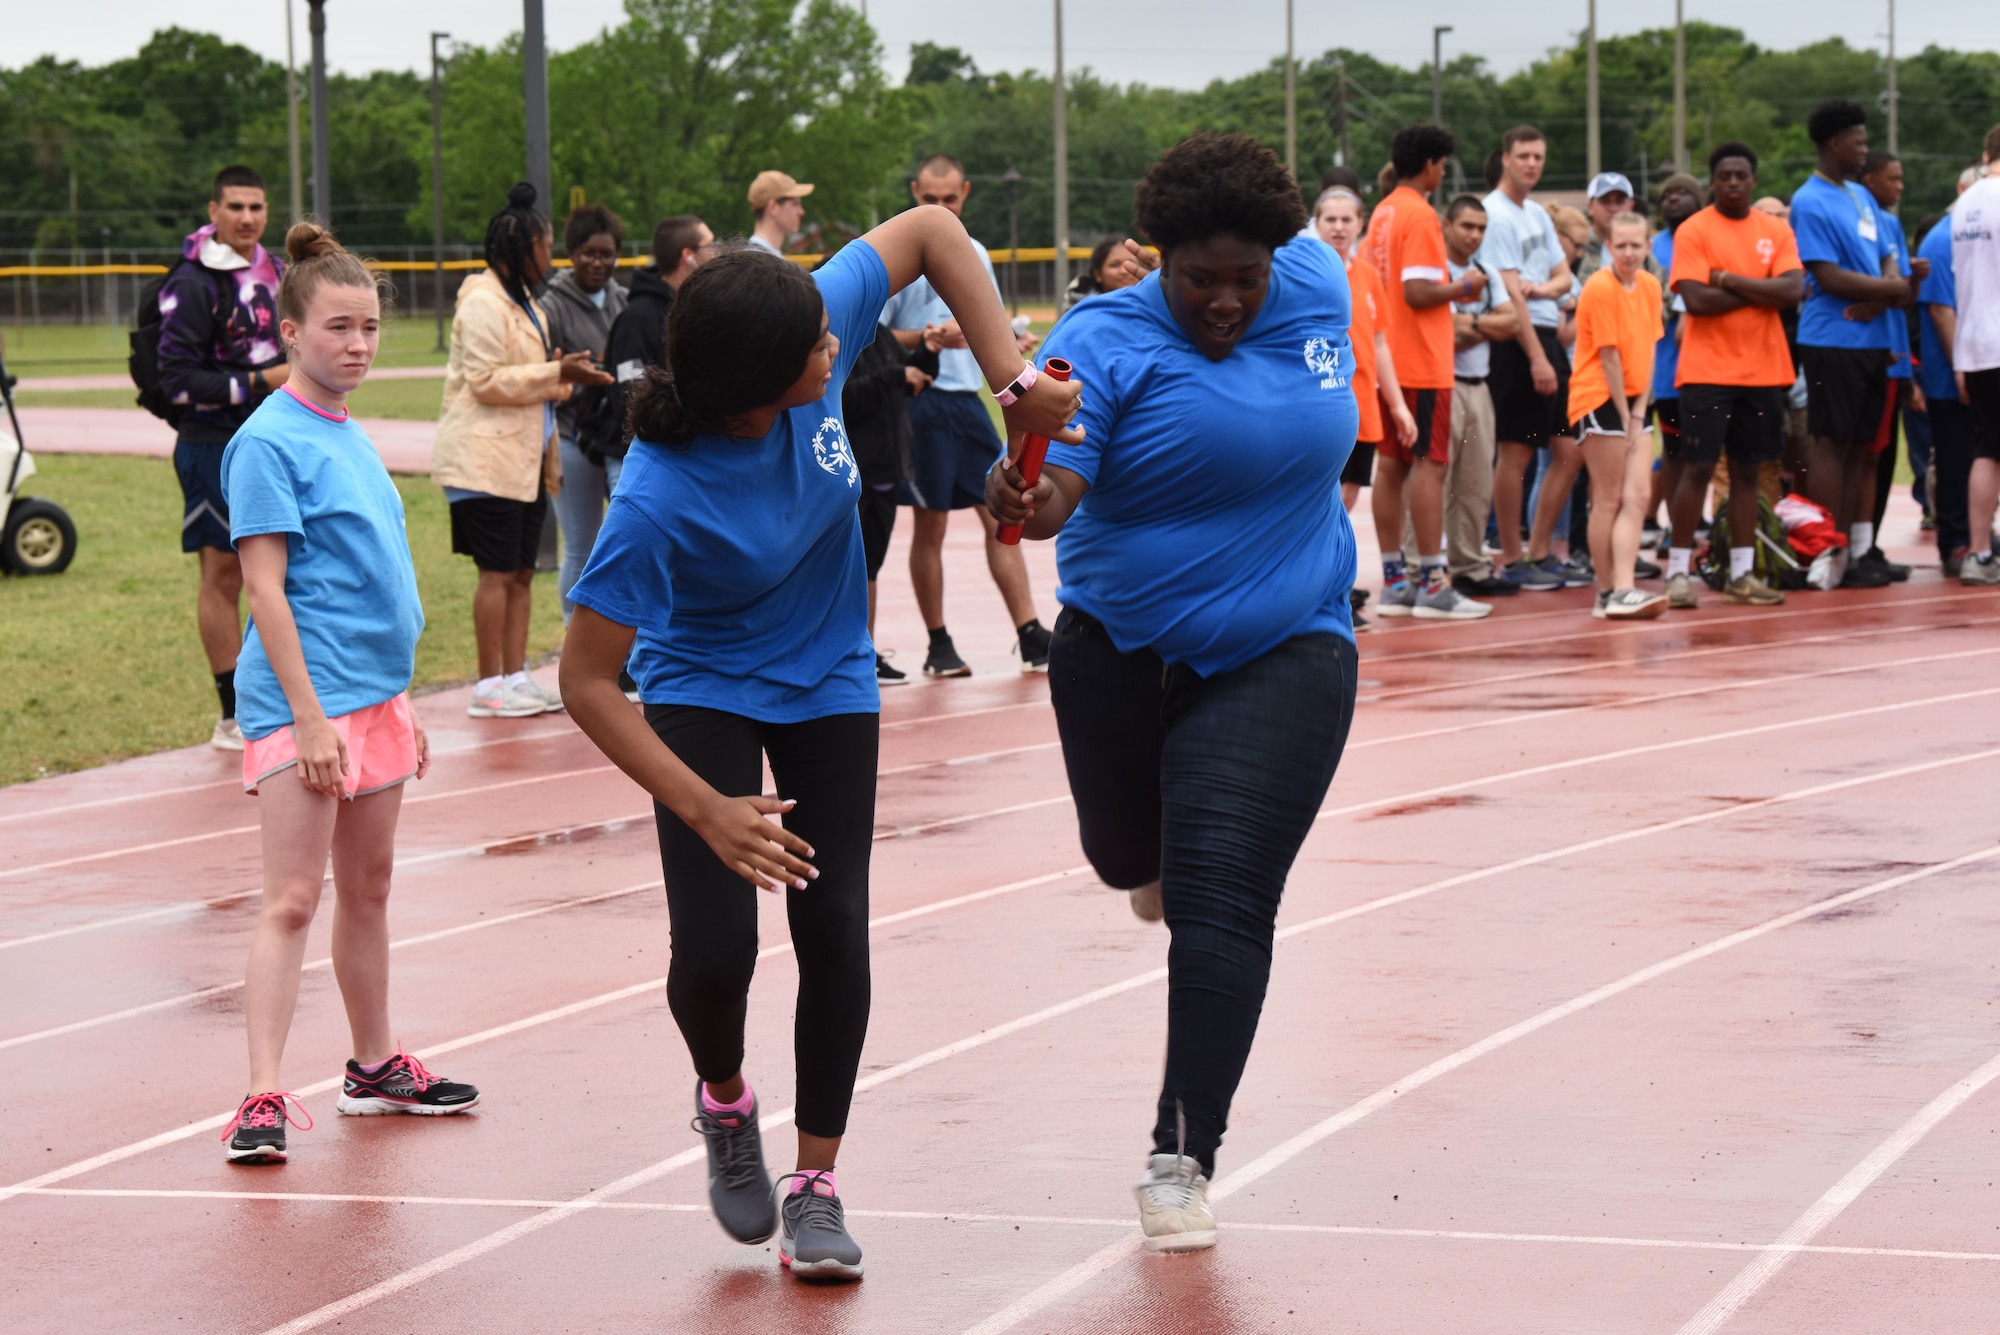 Serenity Stennis, Area 11 athlete, gets the baton to complete the 4x400 relay during the Special Olympics Mississippi 2019 Summer Games at Keelser Air Force Base, Mississippi, May 10, 2019. This is the first year that unified relays have been done during the Special Olympics Mississippi Summer Games. It is a product of a program that allows special olympics athletes and able-bodied athletes from local Mississippi high schools come together to compete in a 4x400 relay. (U.S. Air Force photo by Senior Airman Jenay Randolph)